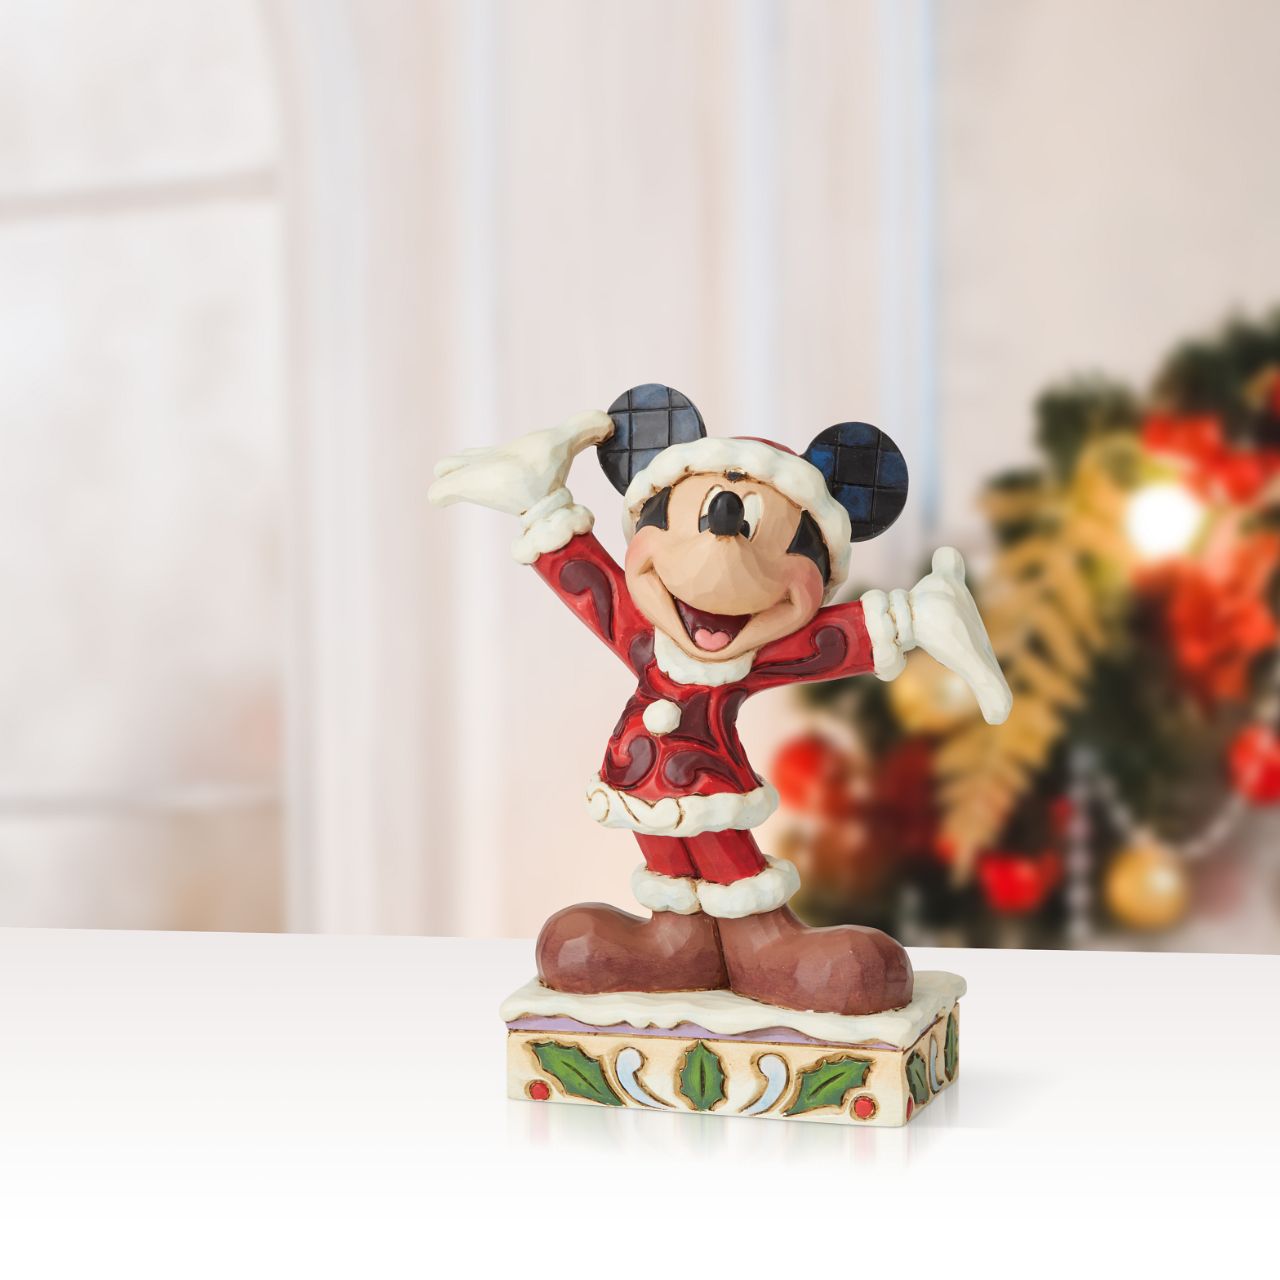 Jim Shore Tis a Splendid Season - Mickey Mouse Figurine  Dressed in his Santa suit, Mickey is excited for the arrival of the fun holiday season. This holiday Mickey is hand-crafted in cast stone and hand painted with Jim Shore's signature rosemaling design.